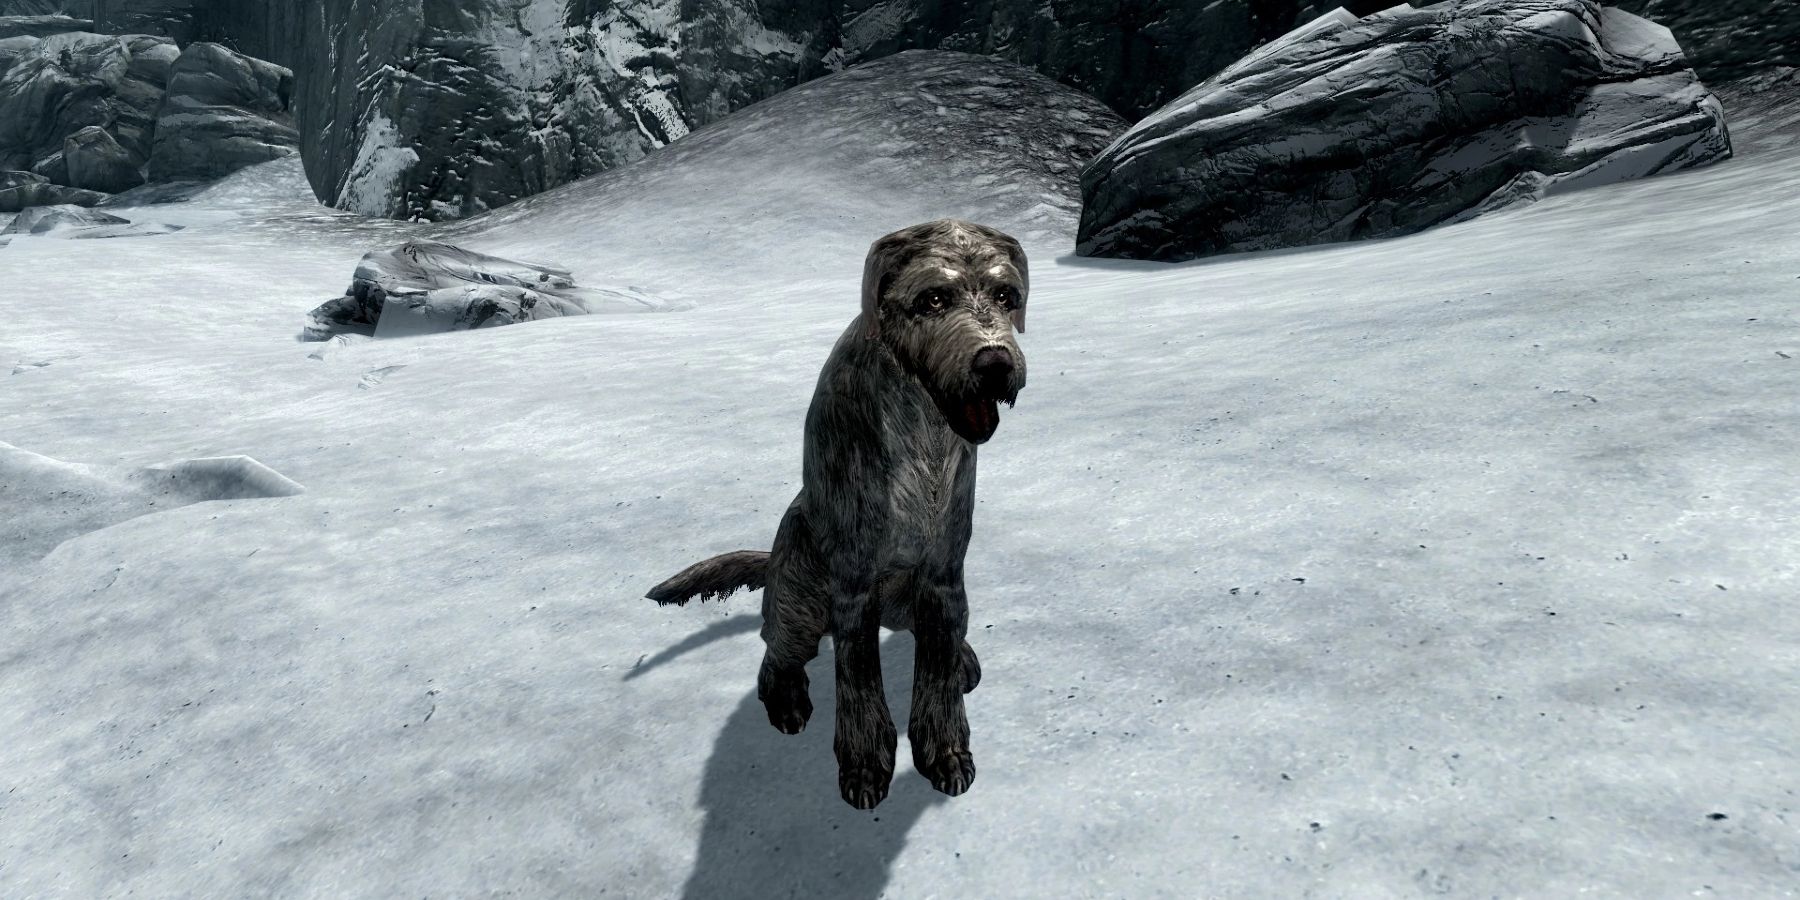 Image from The Elder Scrolls 5 Skyrim showing a dog on a snowy plain.